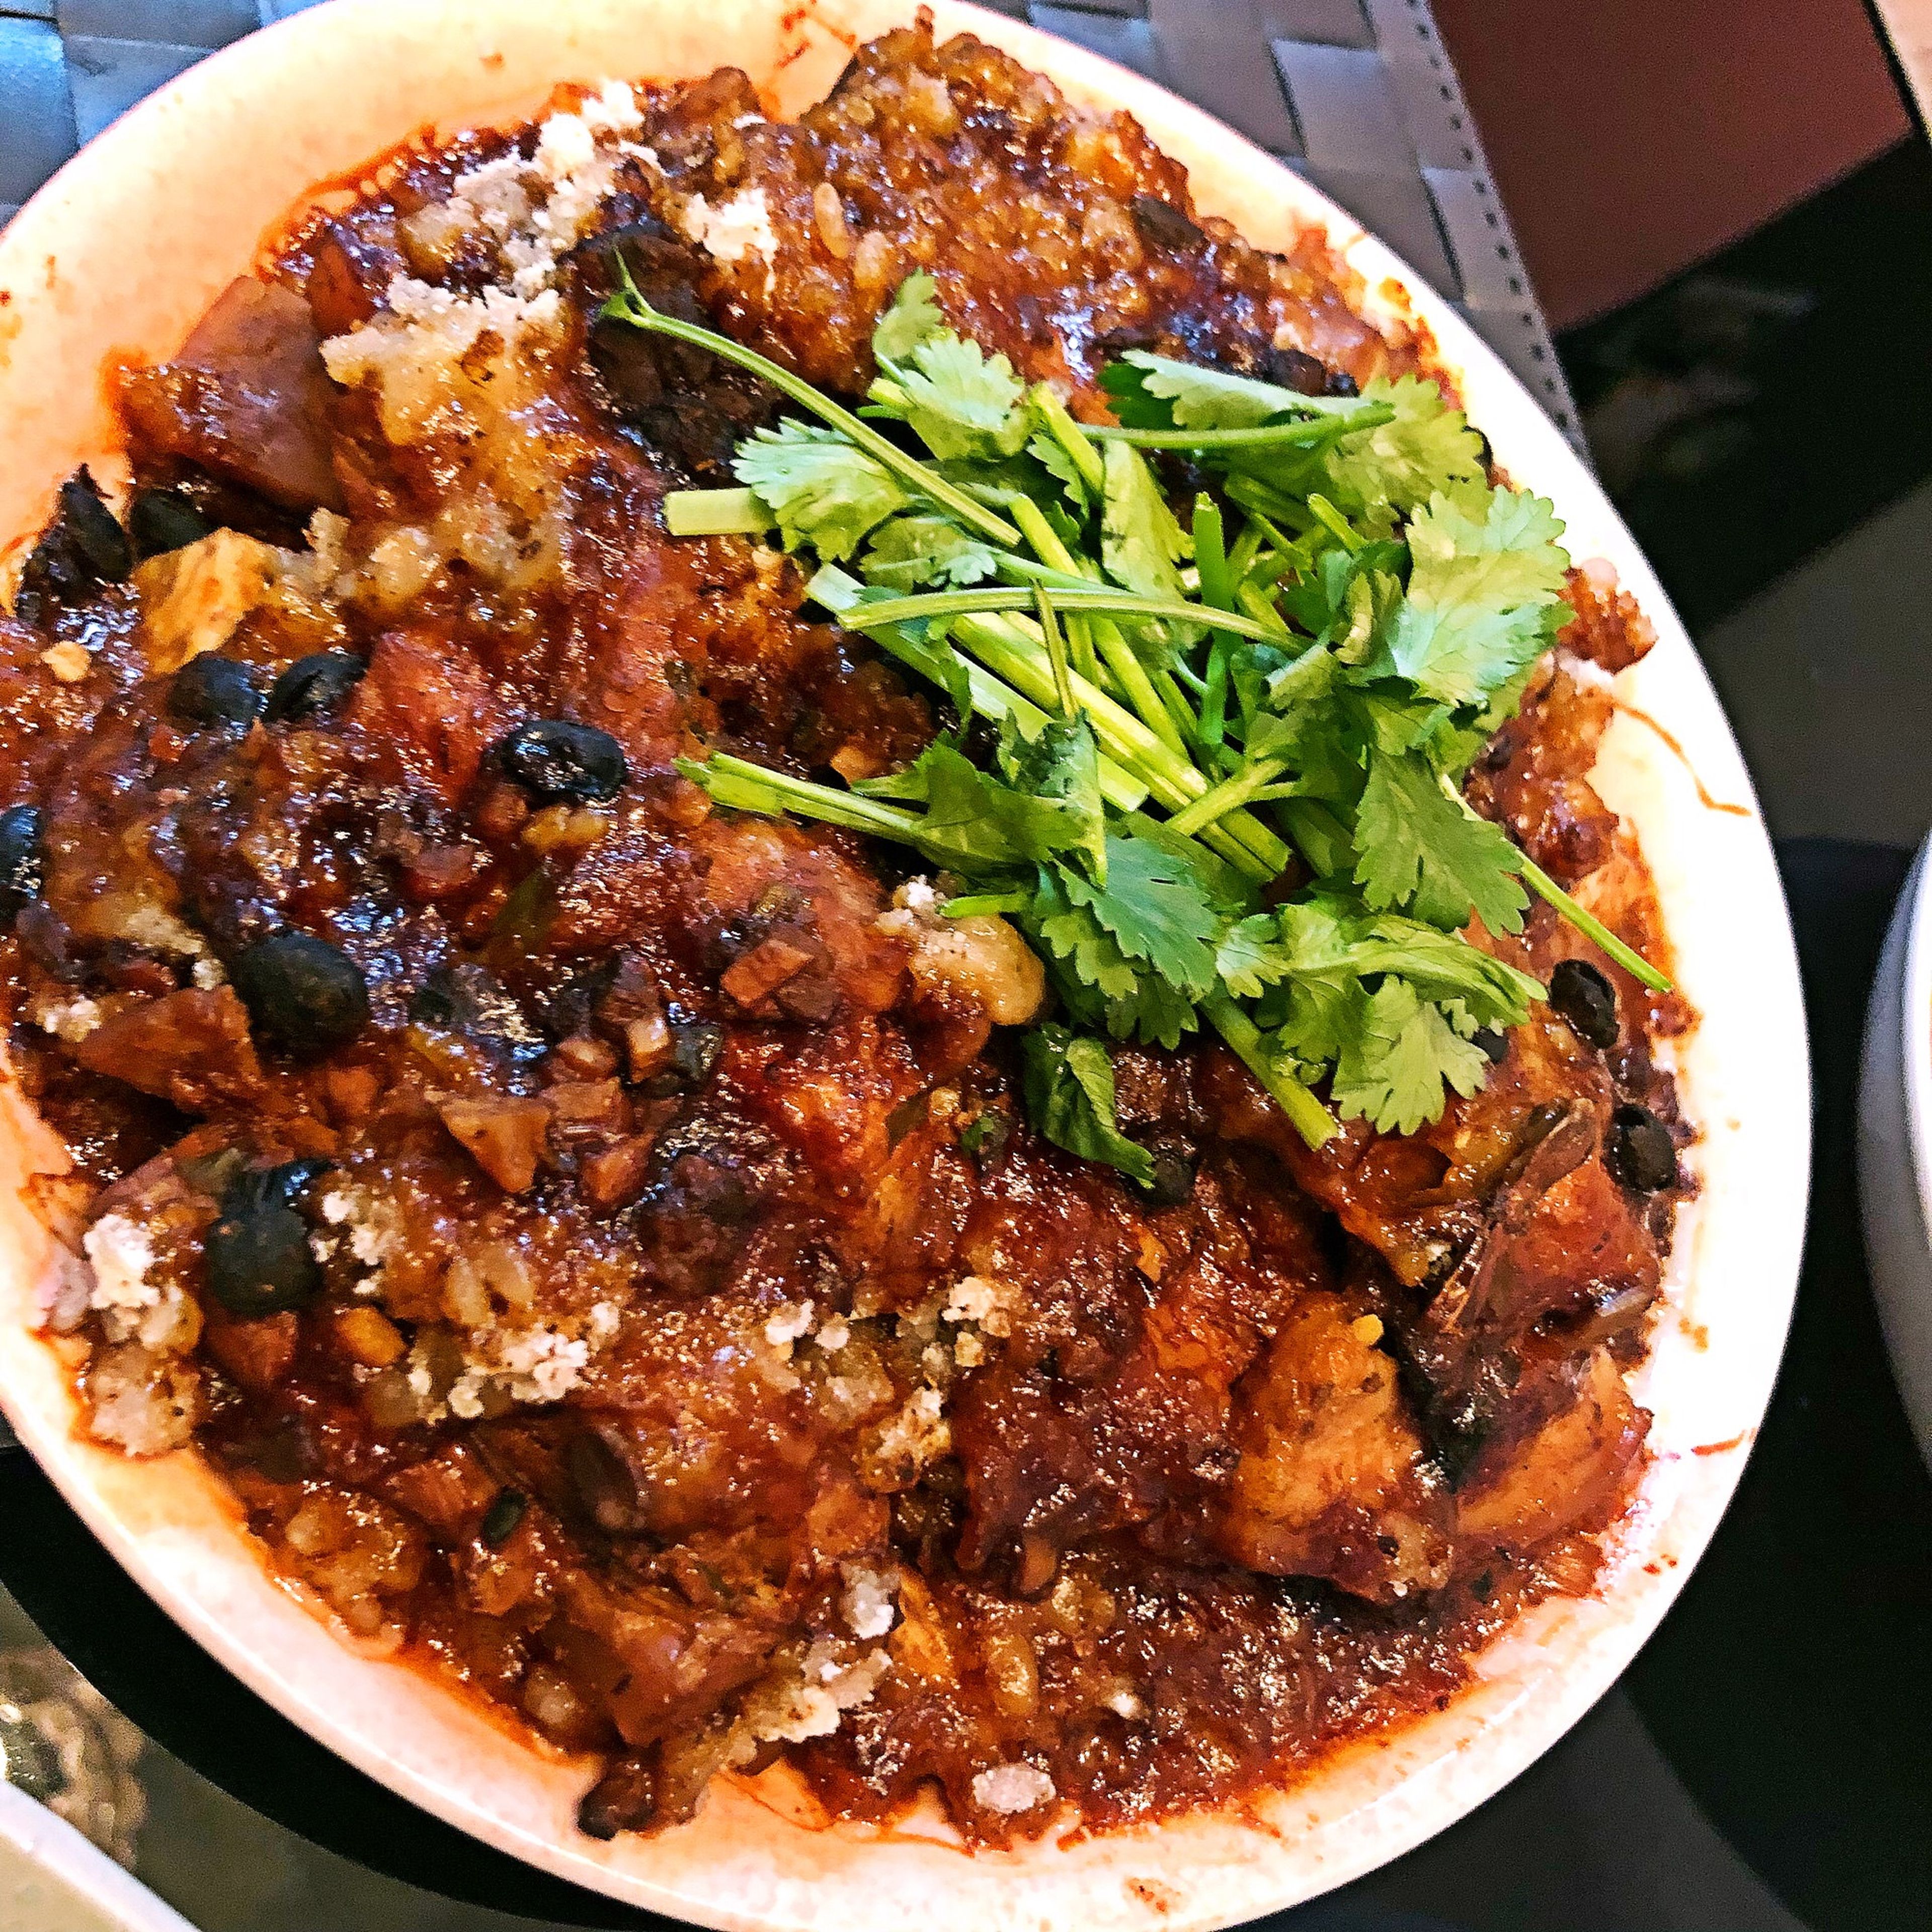 Spicy steamed pork and sticky rice